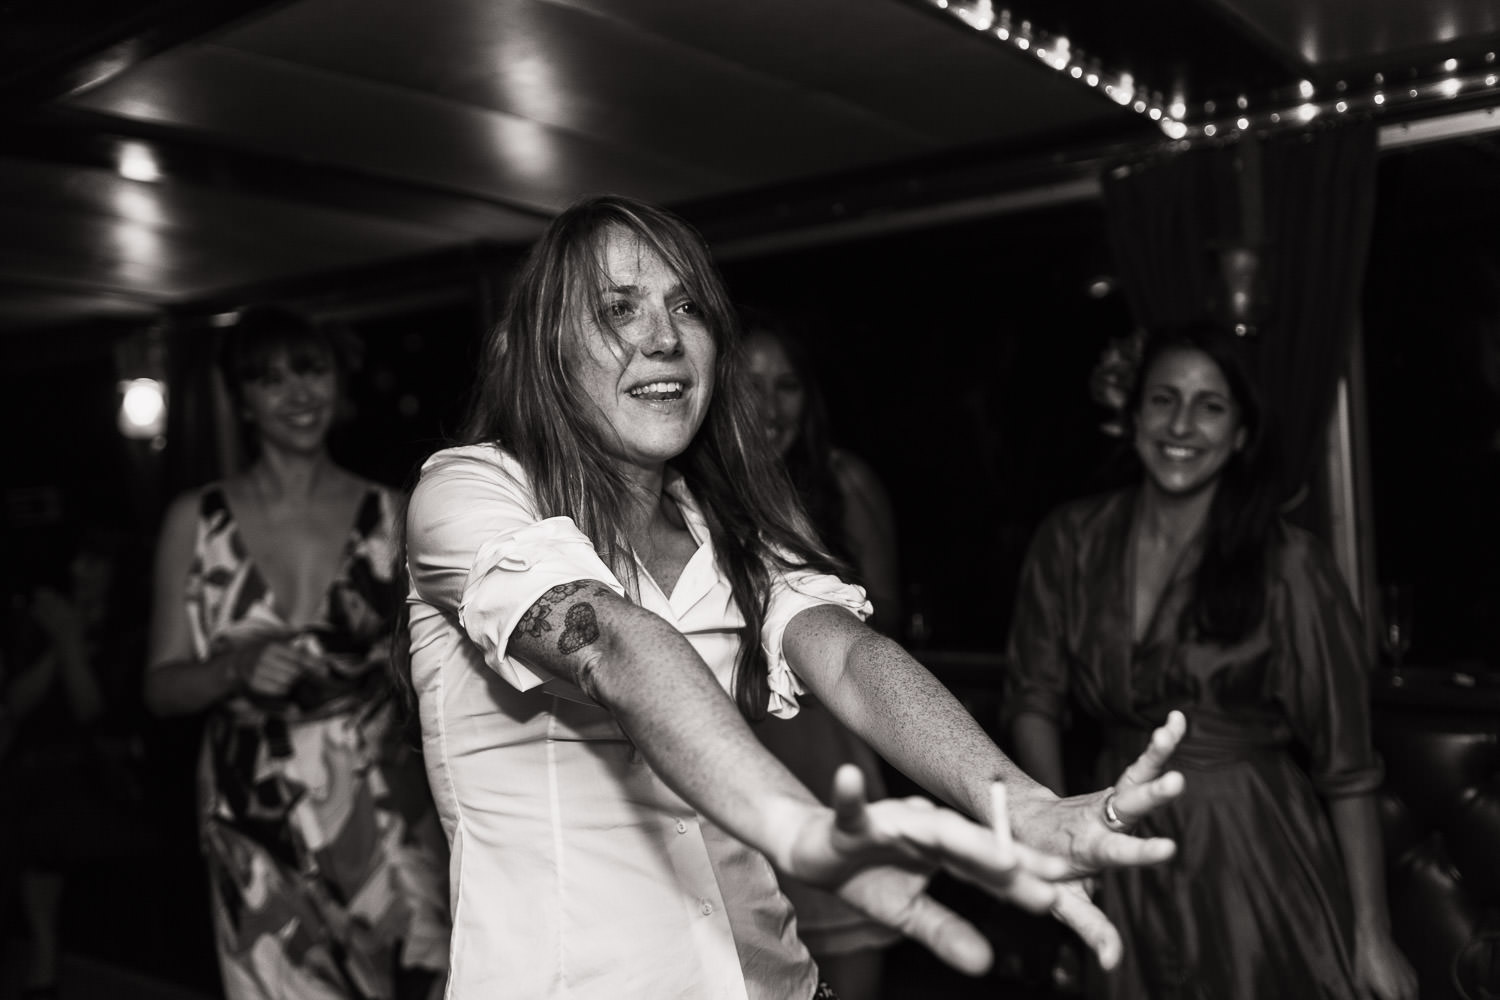 Black and white candid photograph of a woman dancing at a wedding, she's holding a cigarette.